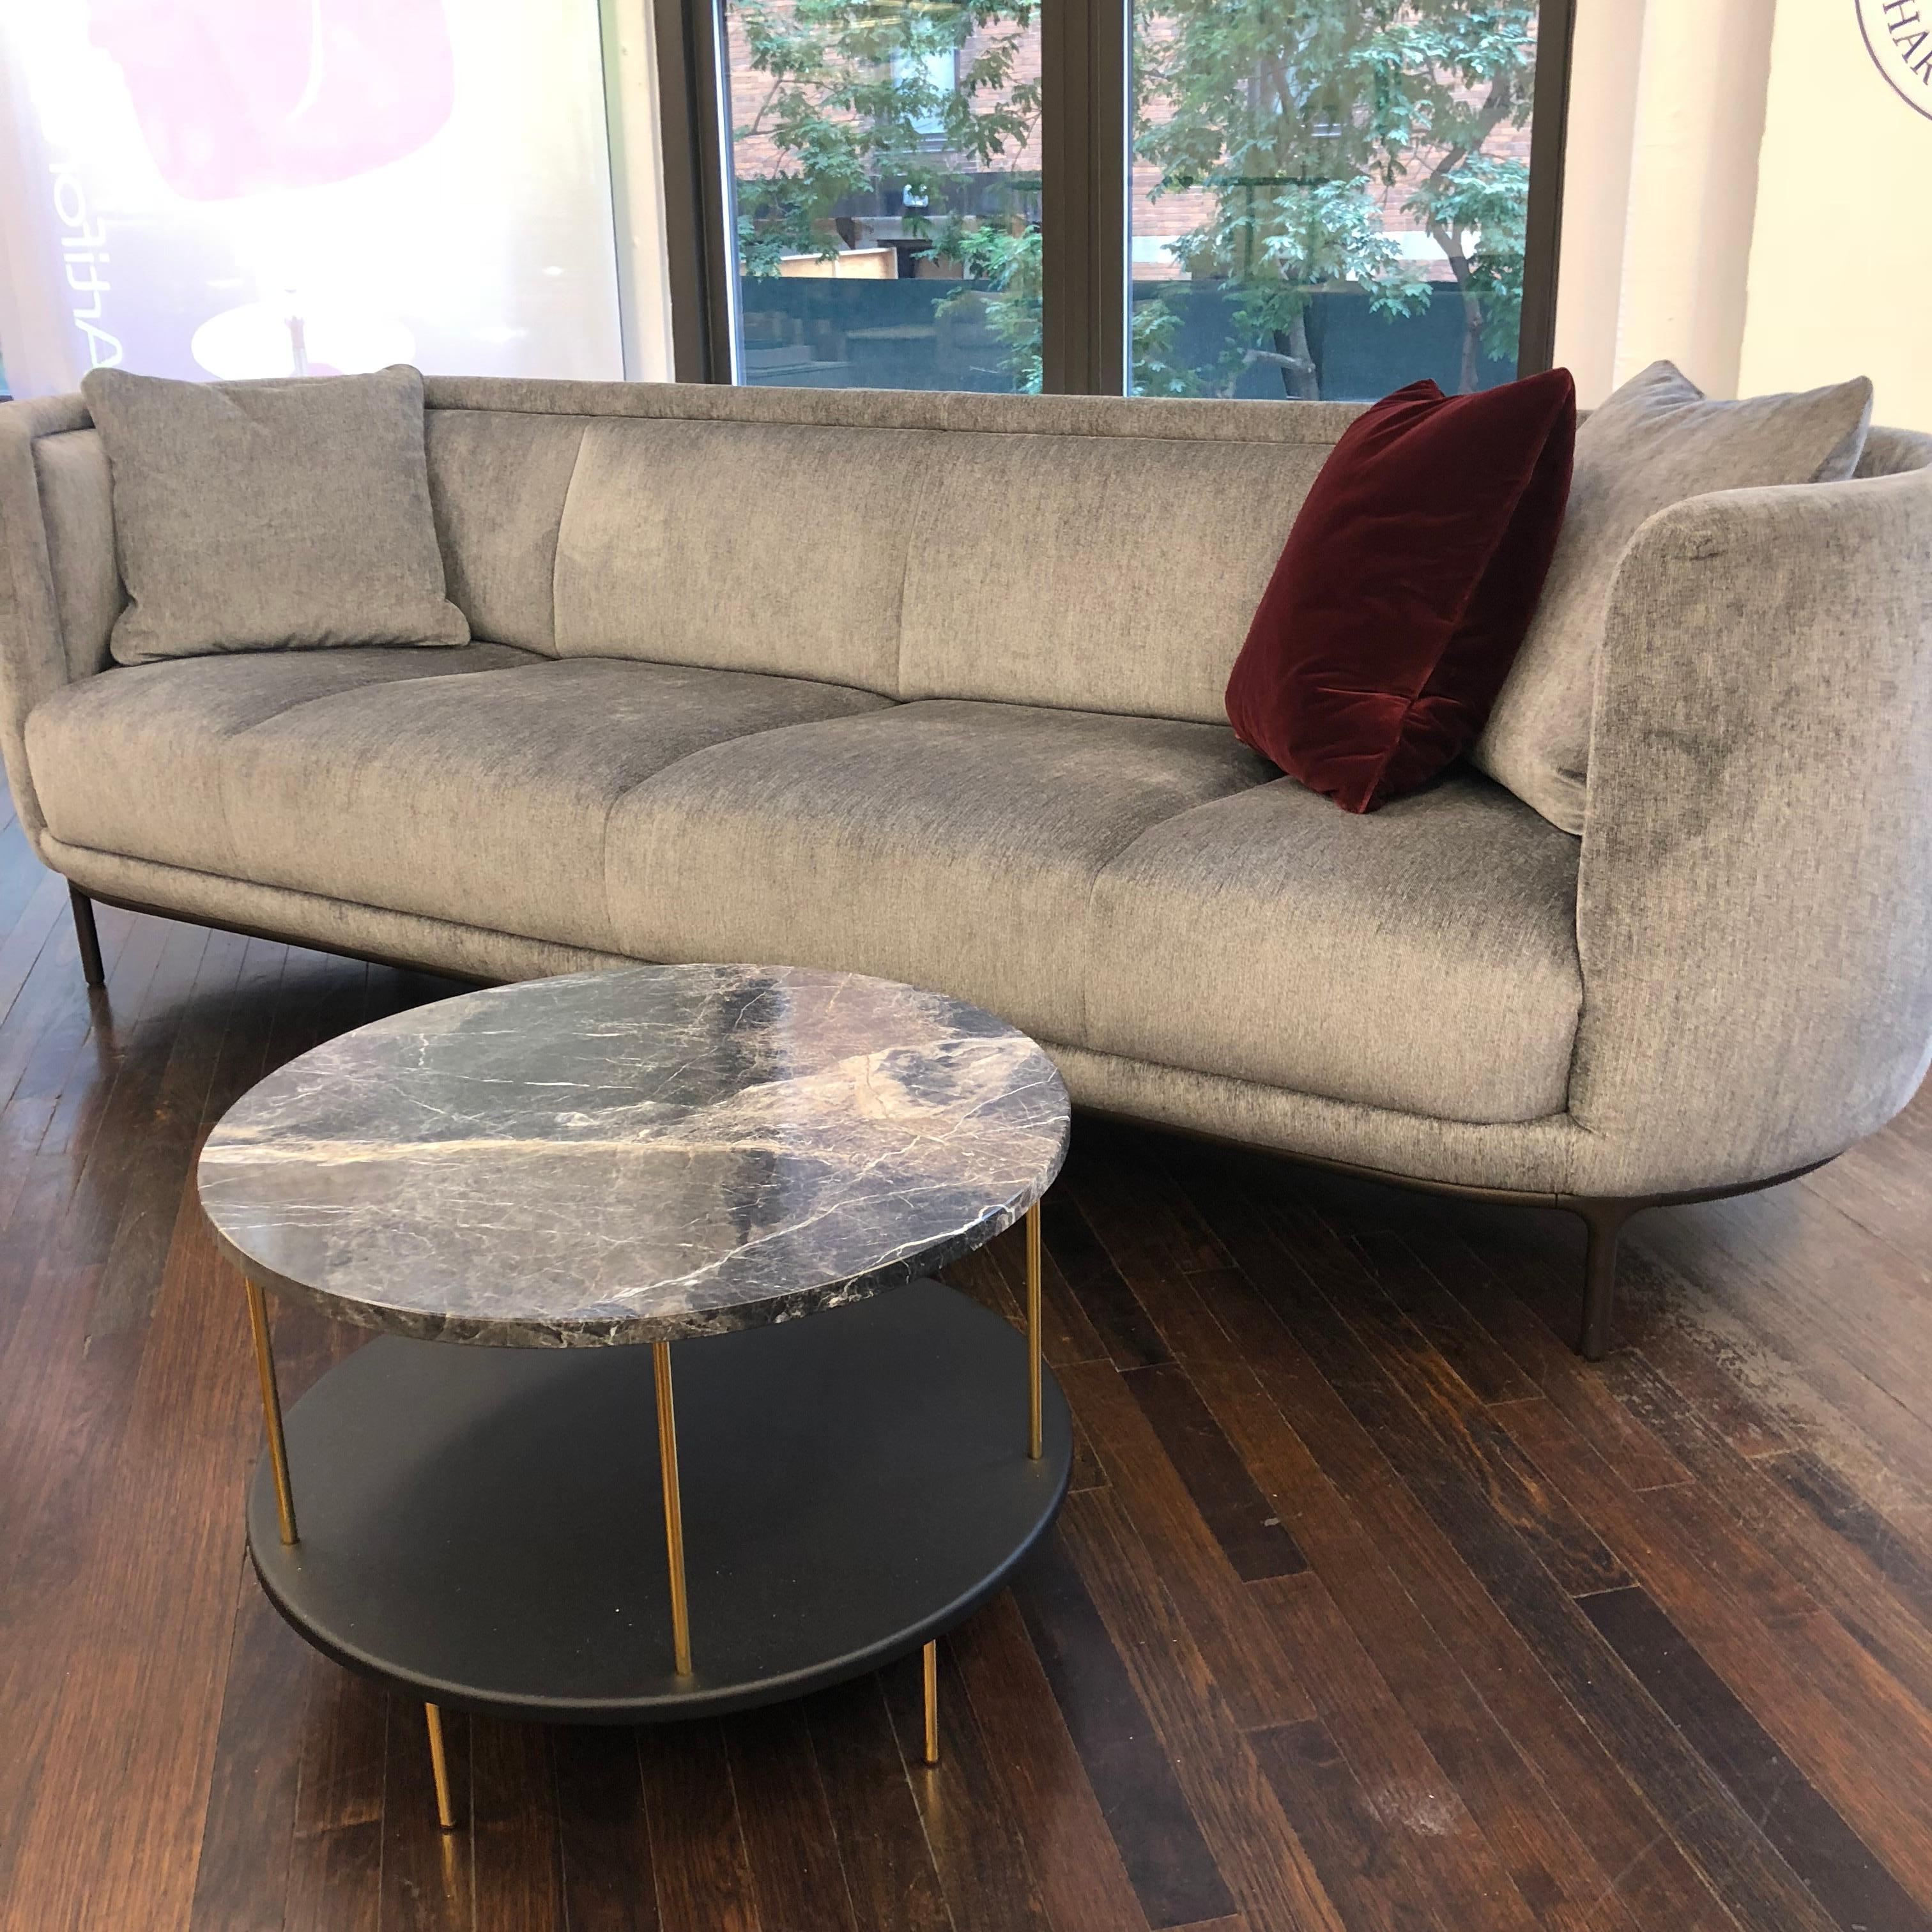 The DD table brings refinement to any furnishings with its playful use of precious materials and the subtle break in the lines. Two table tops, the bottom covered with leather, the top in marble, connected with aluminum rods. They are offset,